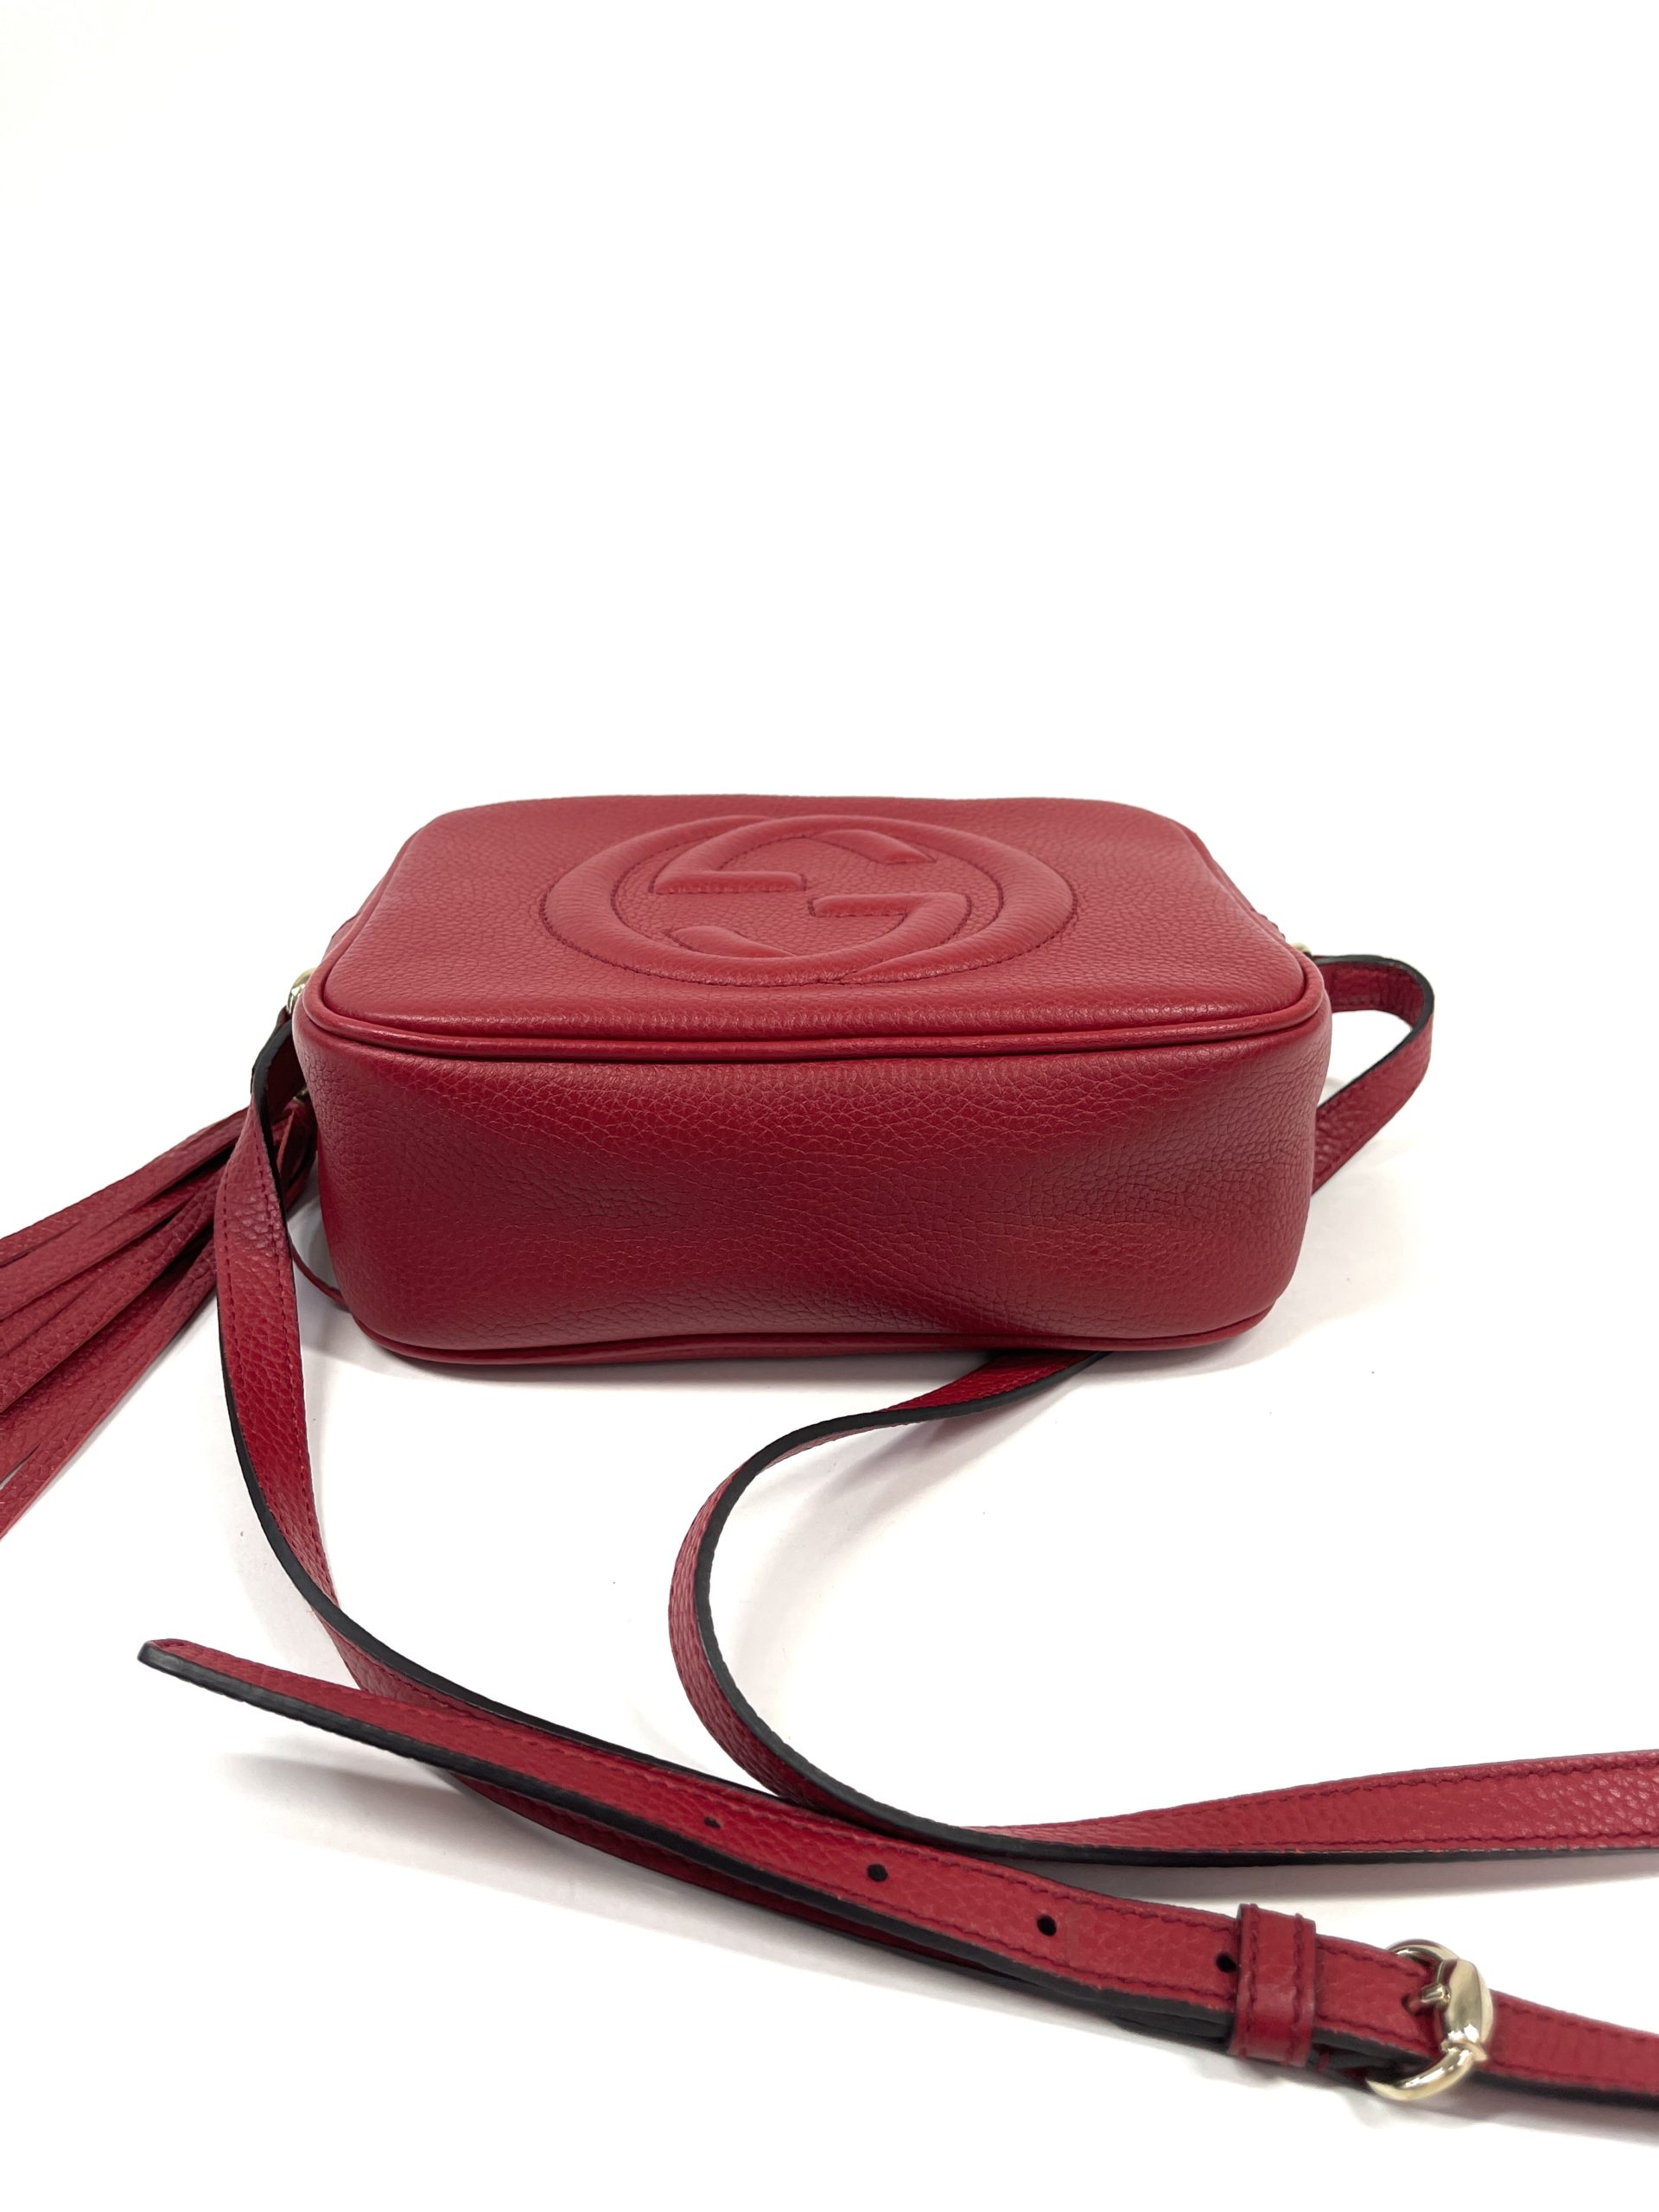 Gucci Soho Disco Pebbled Calfskin Small Tabasco Red Leather Cross Body -  MyDesignerly